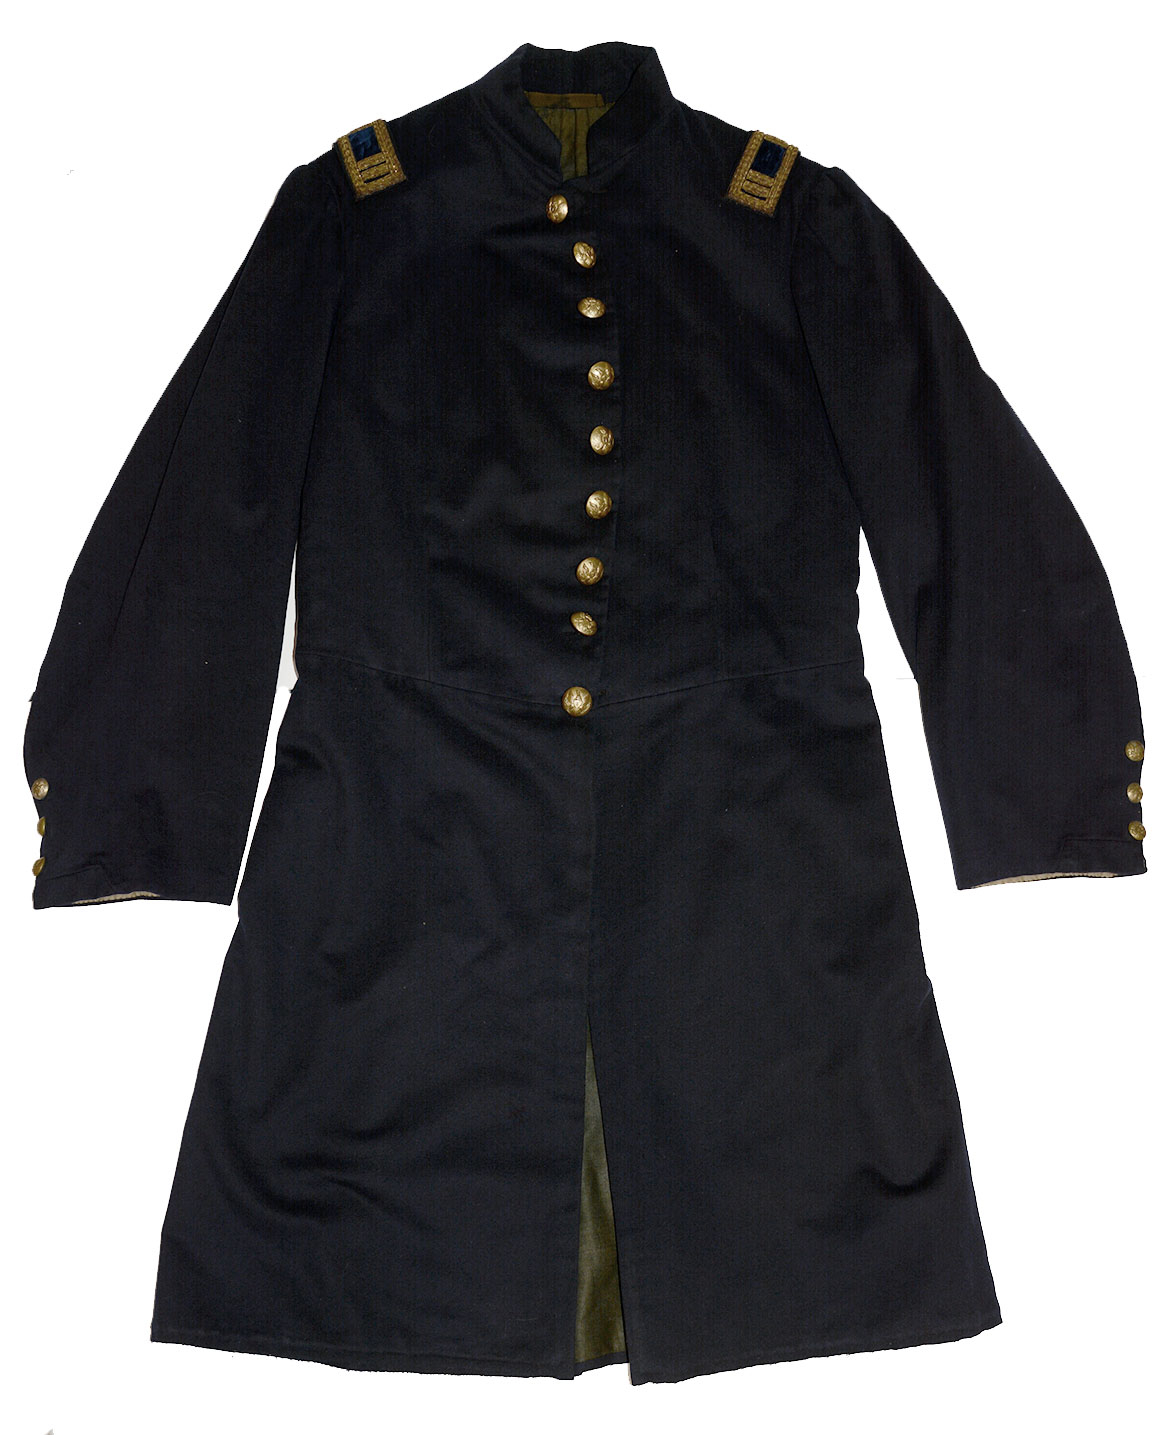 MINTY IDENTIFIED CIVIL WAR REGULATION UNION INFANTRY CAPTAIN’S FROCK COAT: HENRY H. FETTERHOLF, 129th PA VOLS AND 34th PA EMERGENCY MILITIA